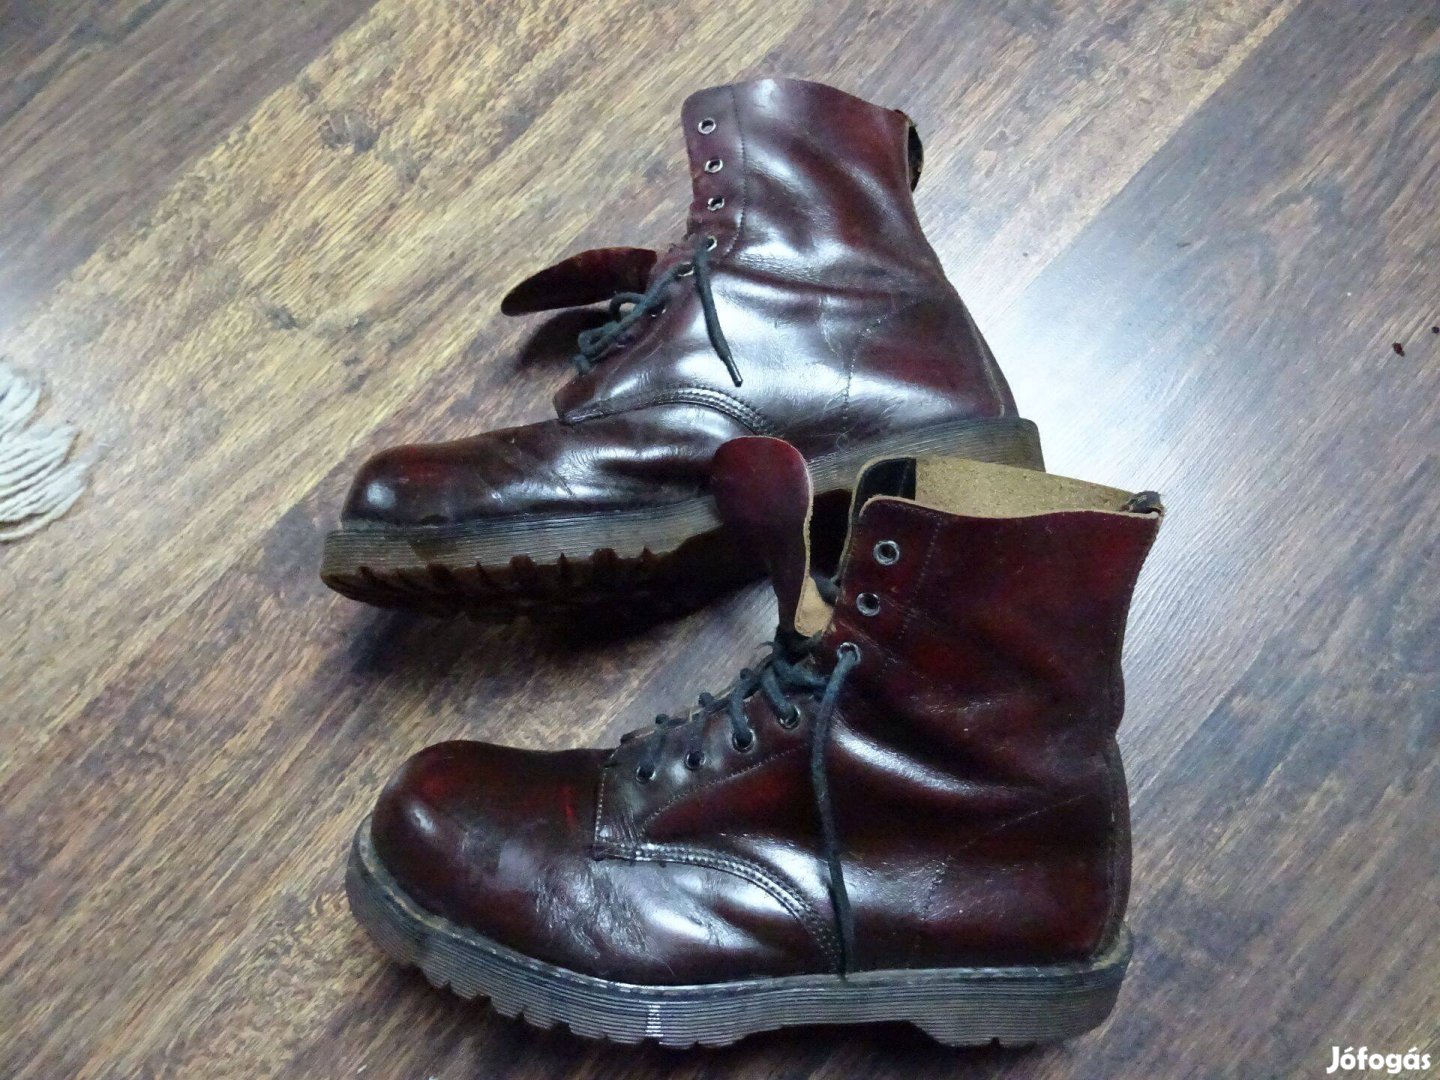 Martens Bakancs MIE (Made in England) 43-as